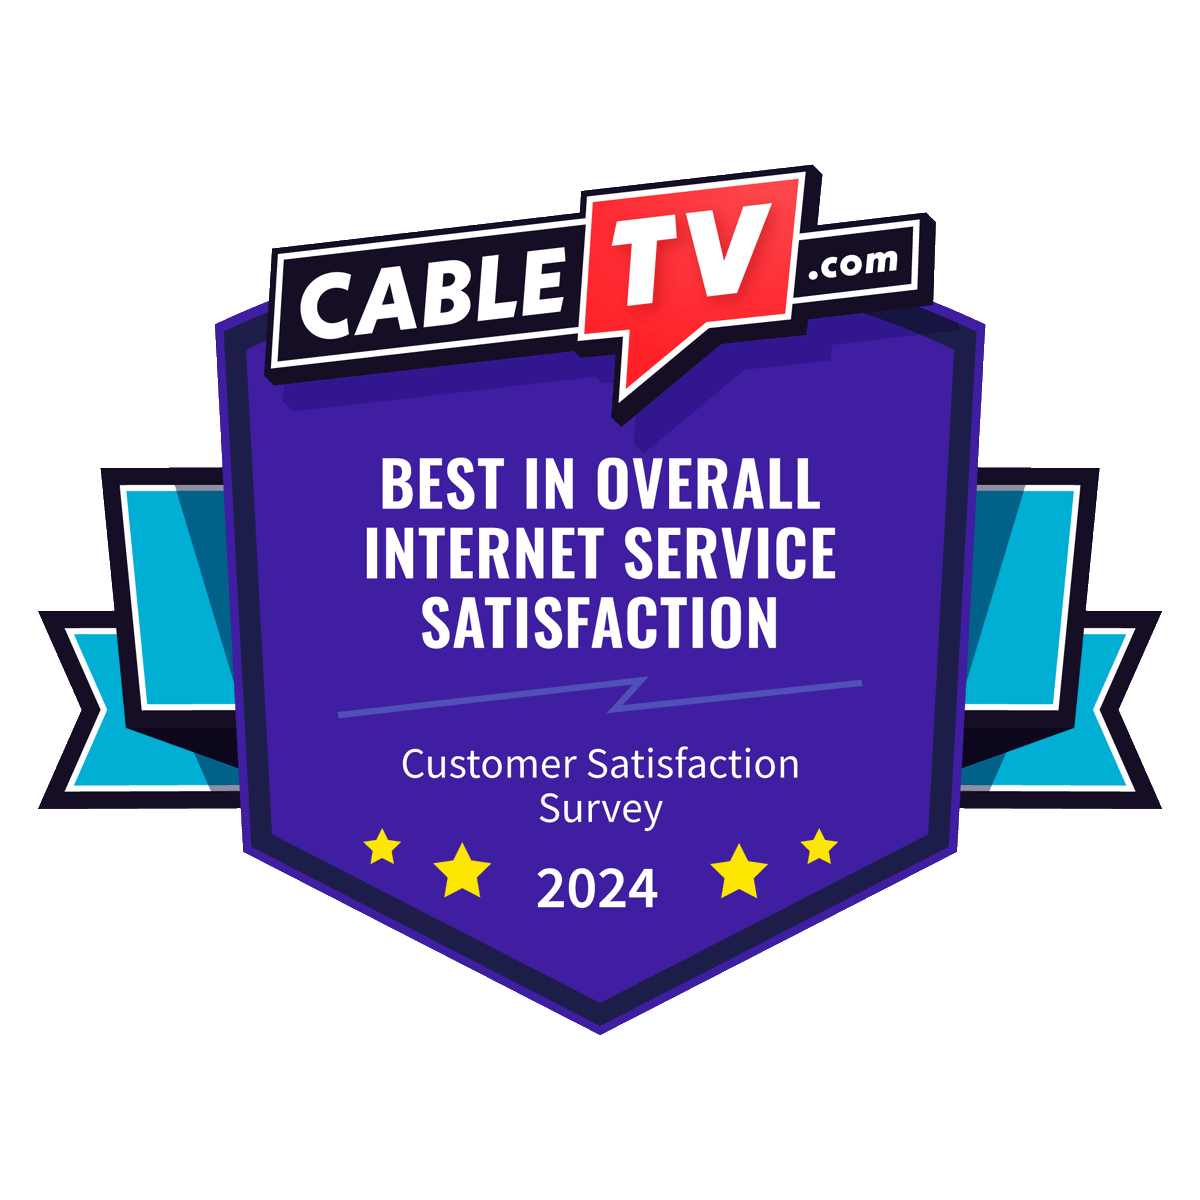 Quantum Fiber was recently named the best in overall internet service satisfaction by CableTV.com!